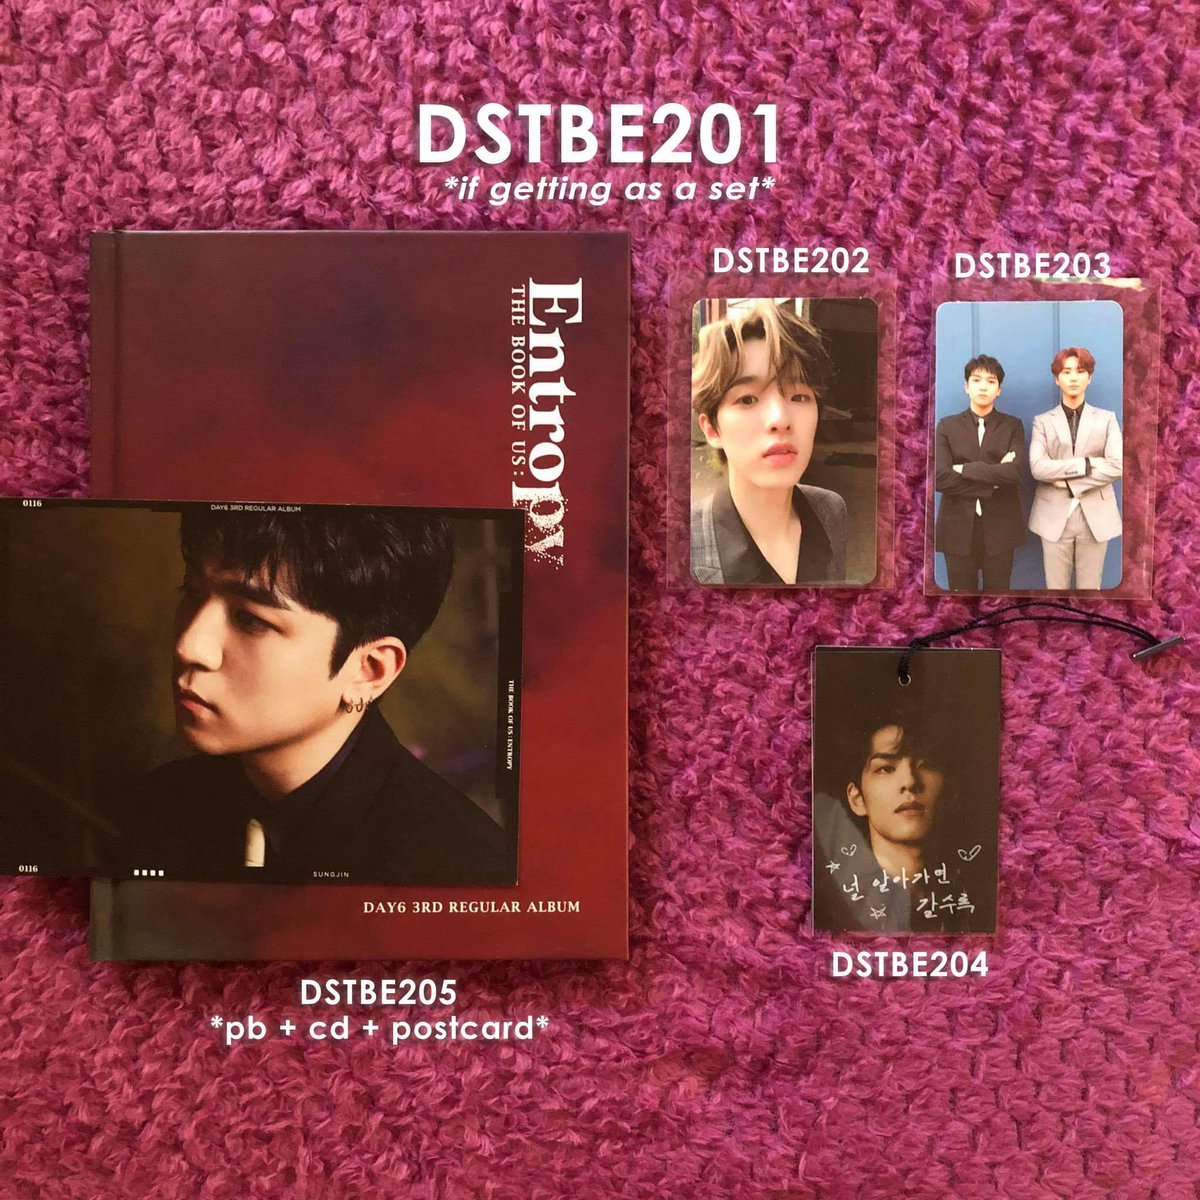 wts / lfbday6 albums (set / tingi)— tbou : entropy (sweet, chaos ver) lapag : april 12 - 6pm complete list, prices & photos : see tweet at the start of this thread ph sungjin jae youngk wonpil dowoon pc photocard unsealed bookmarks